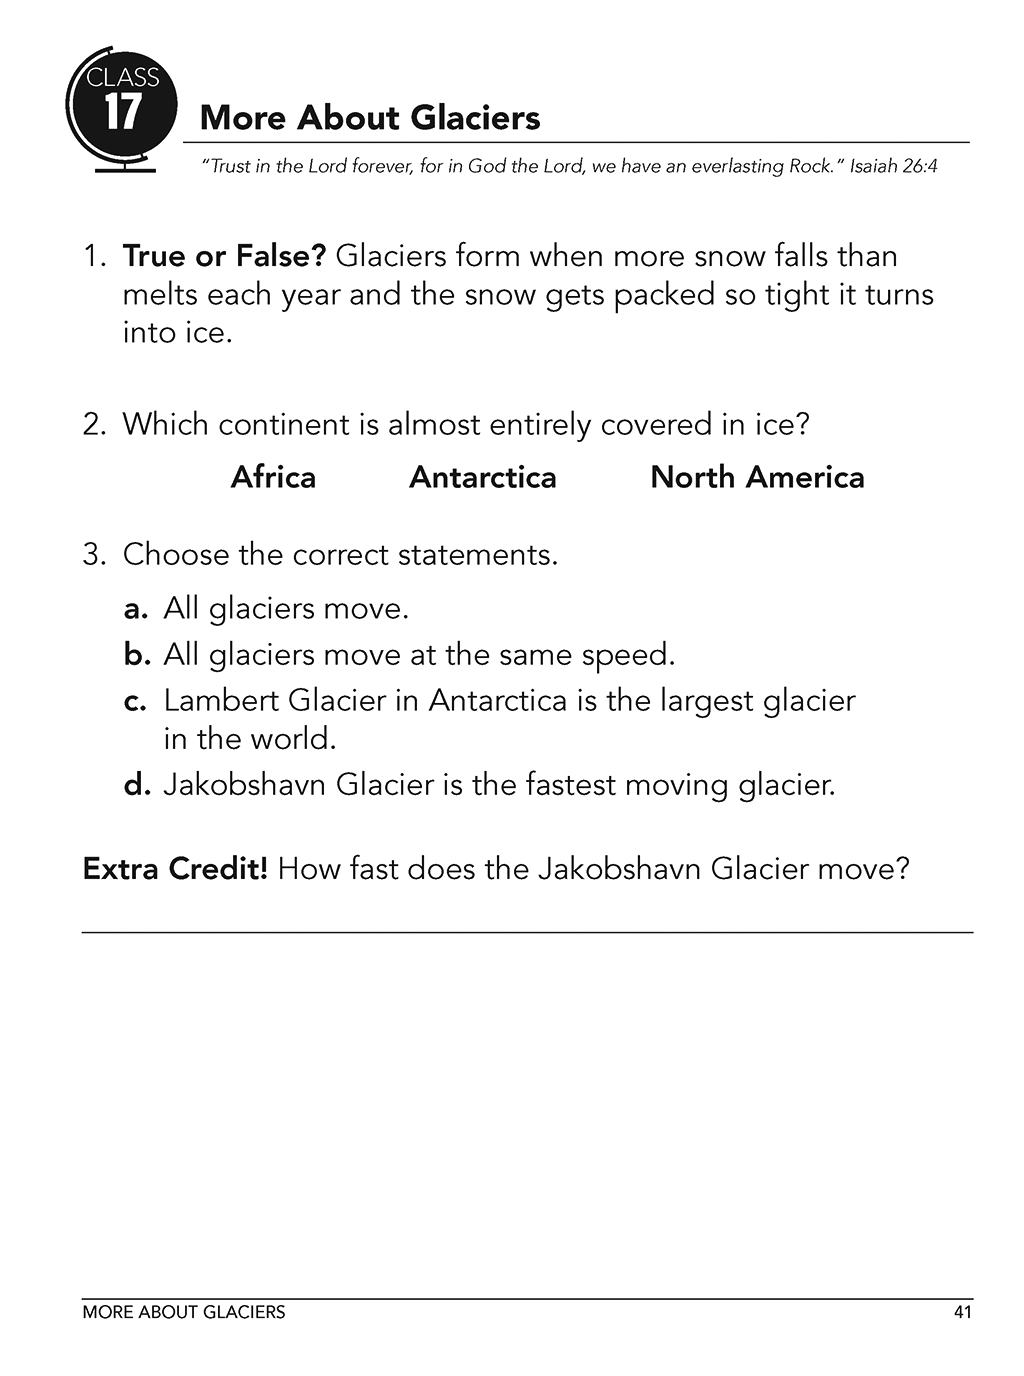 Earth Science homeschool curriculum workbook level A sample page class 17